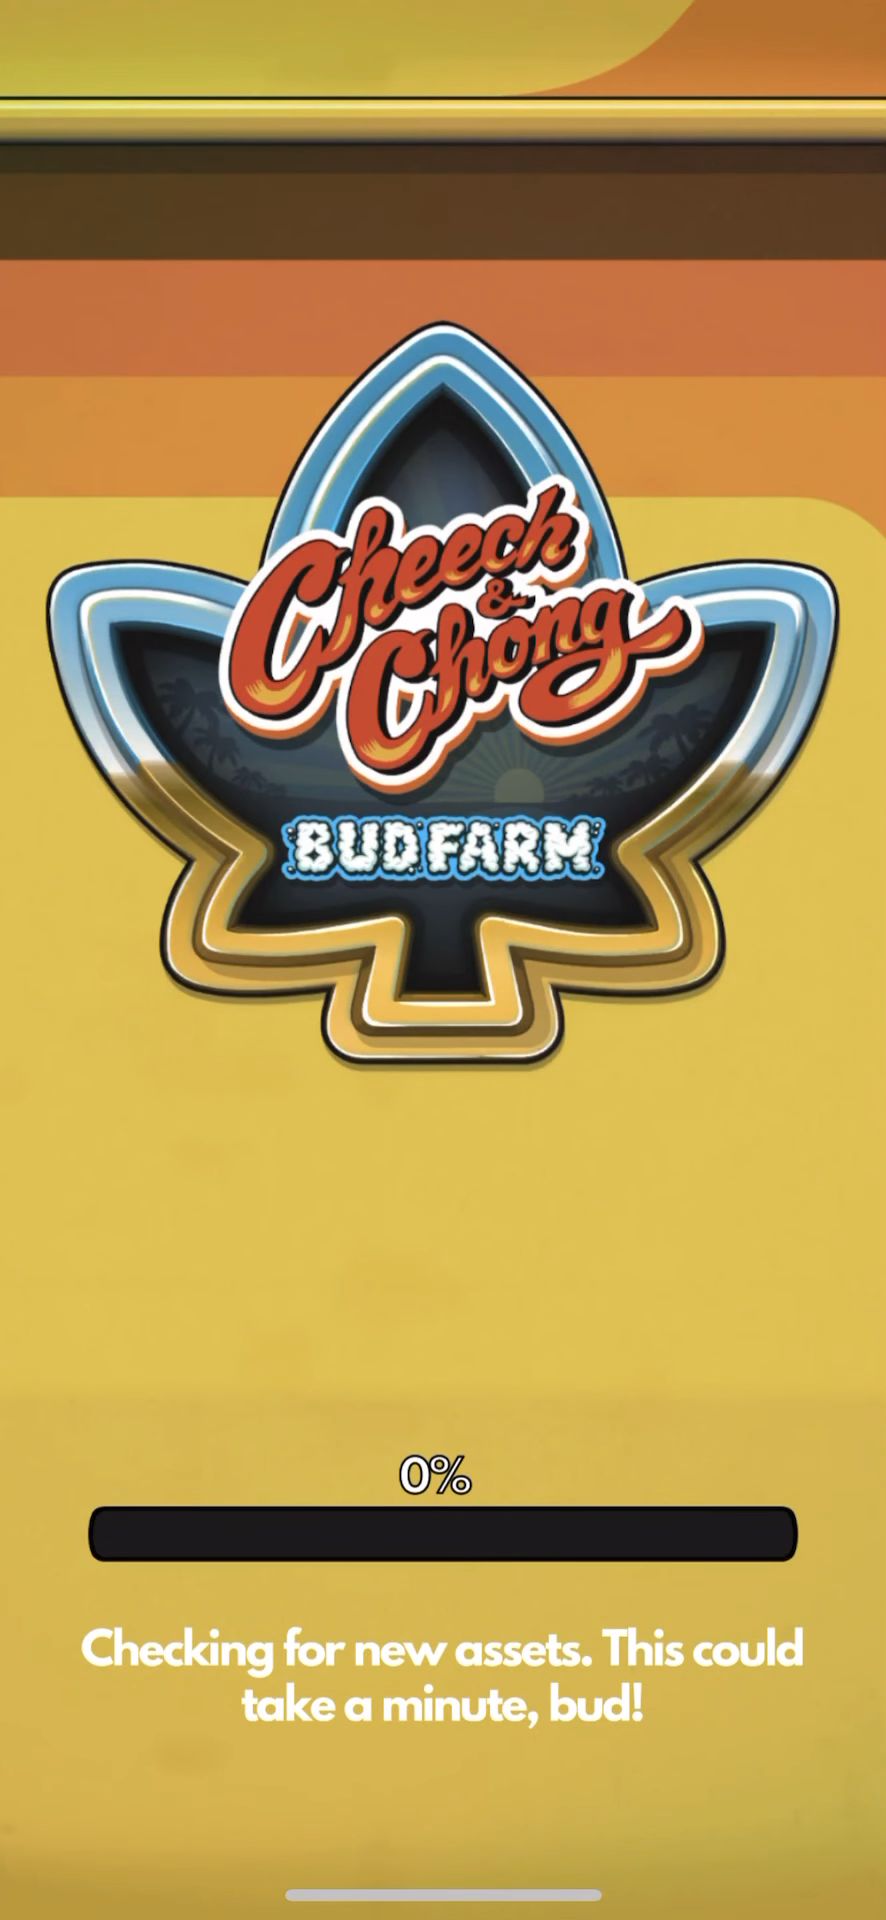 Cheech and Chong Bud Farm for Android